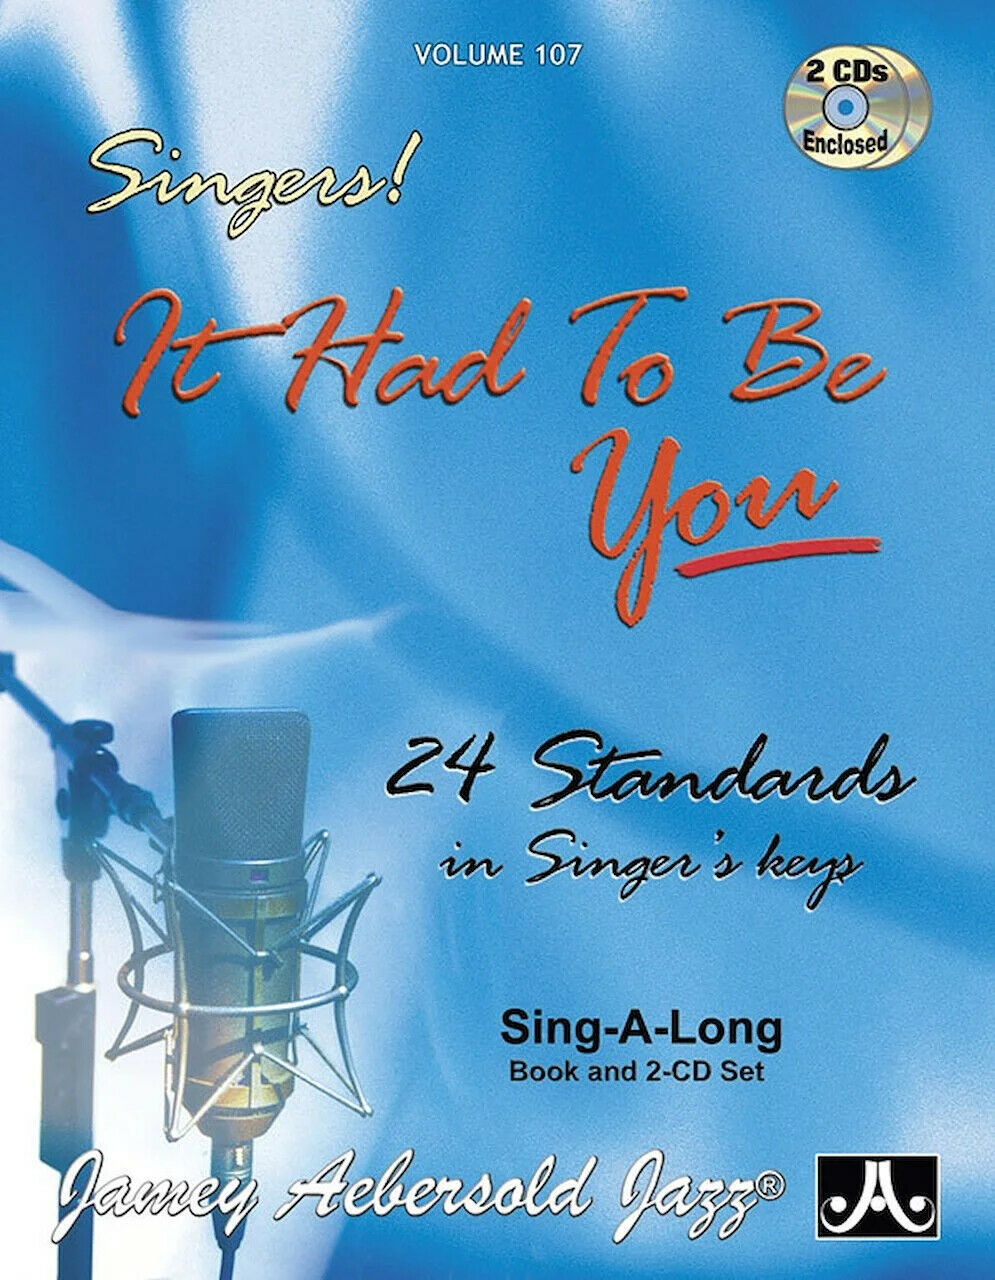 Jamey Aebersold Jazz, Volume 107: Singers!: It Had to Be You: 24 Standards in...